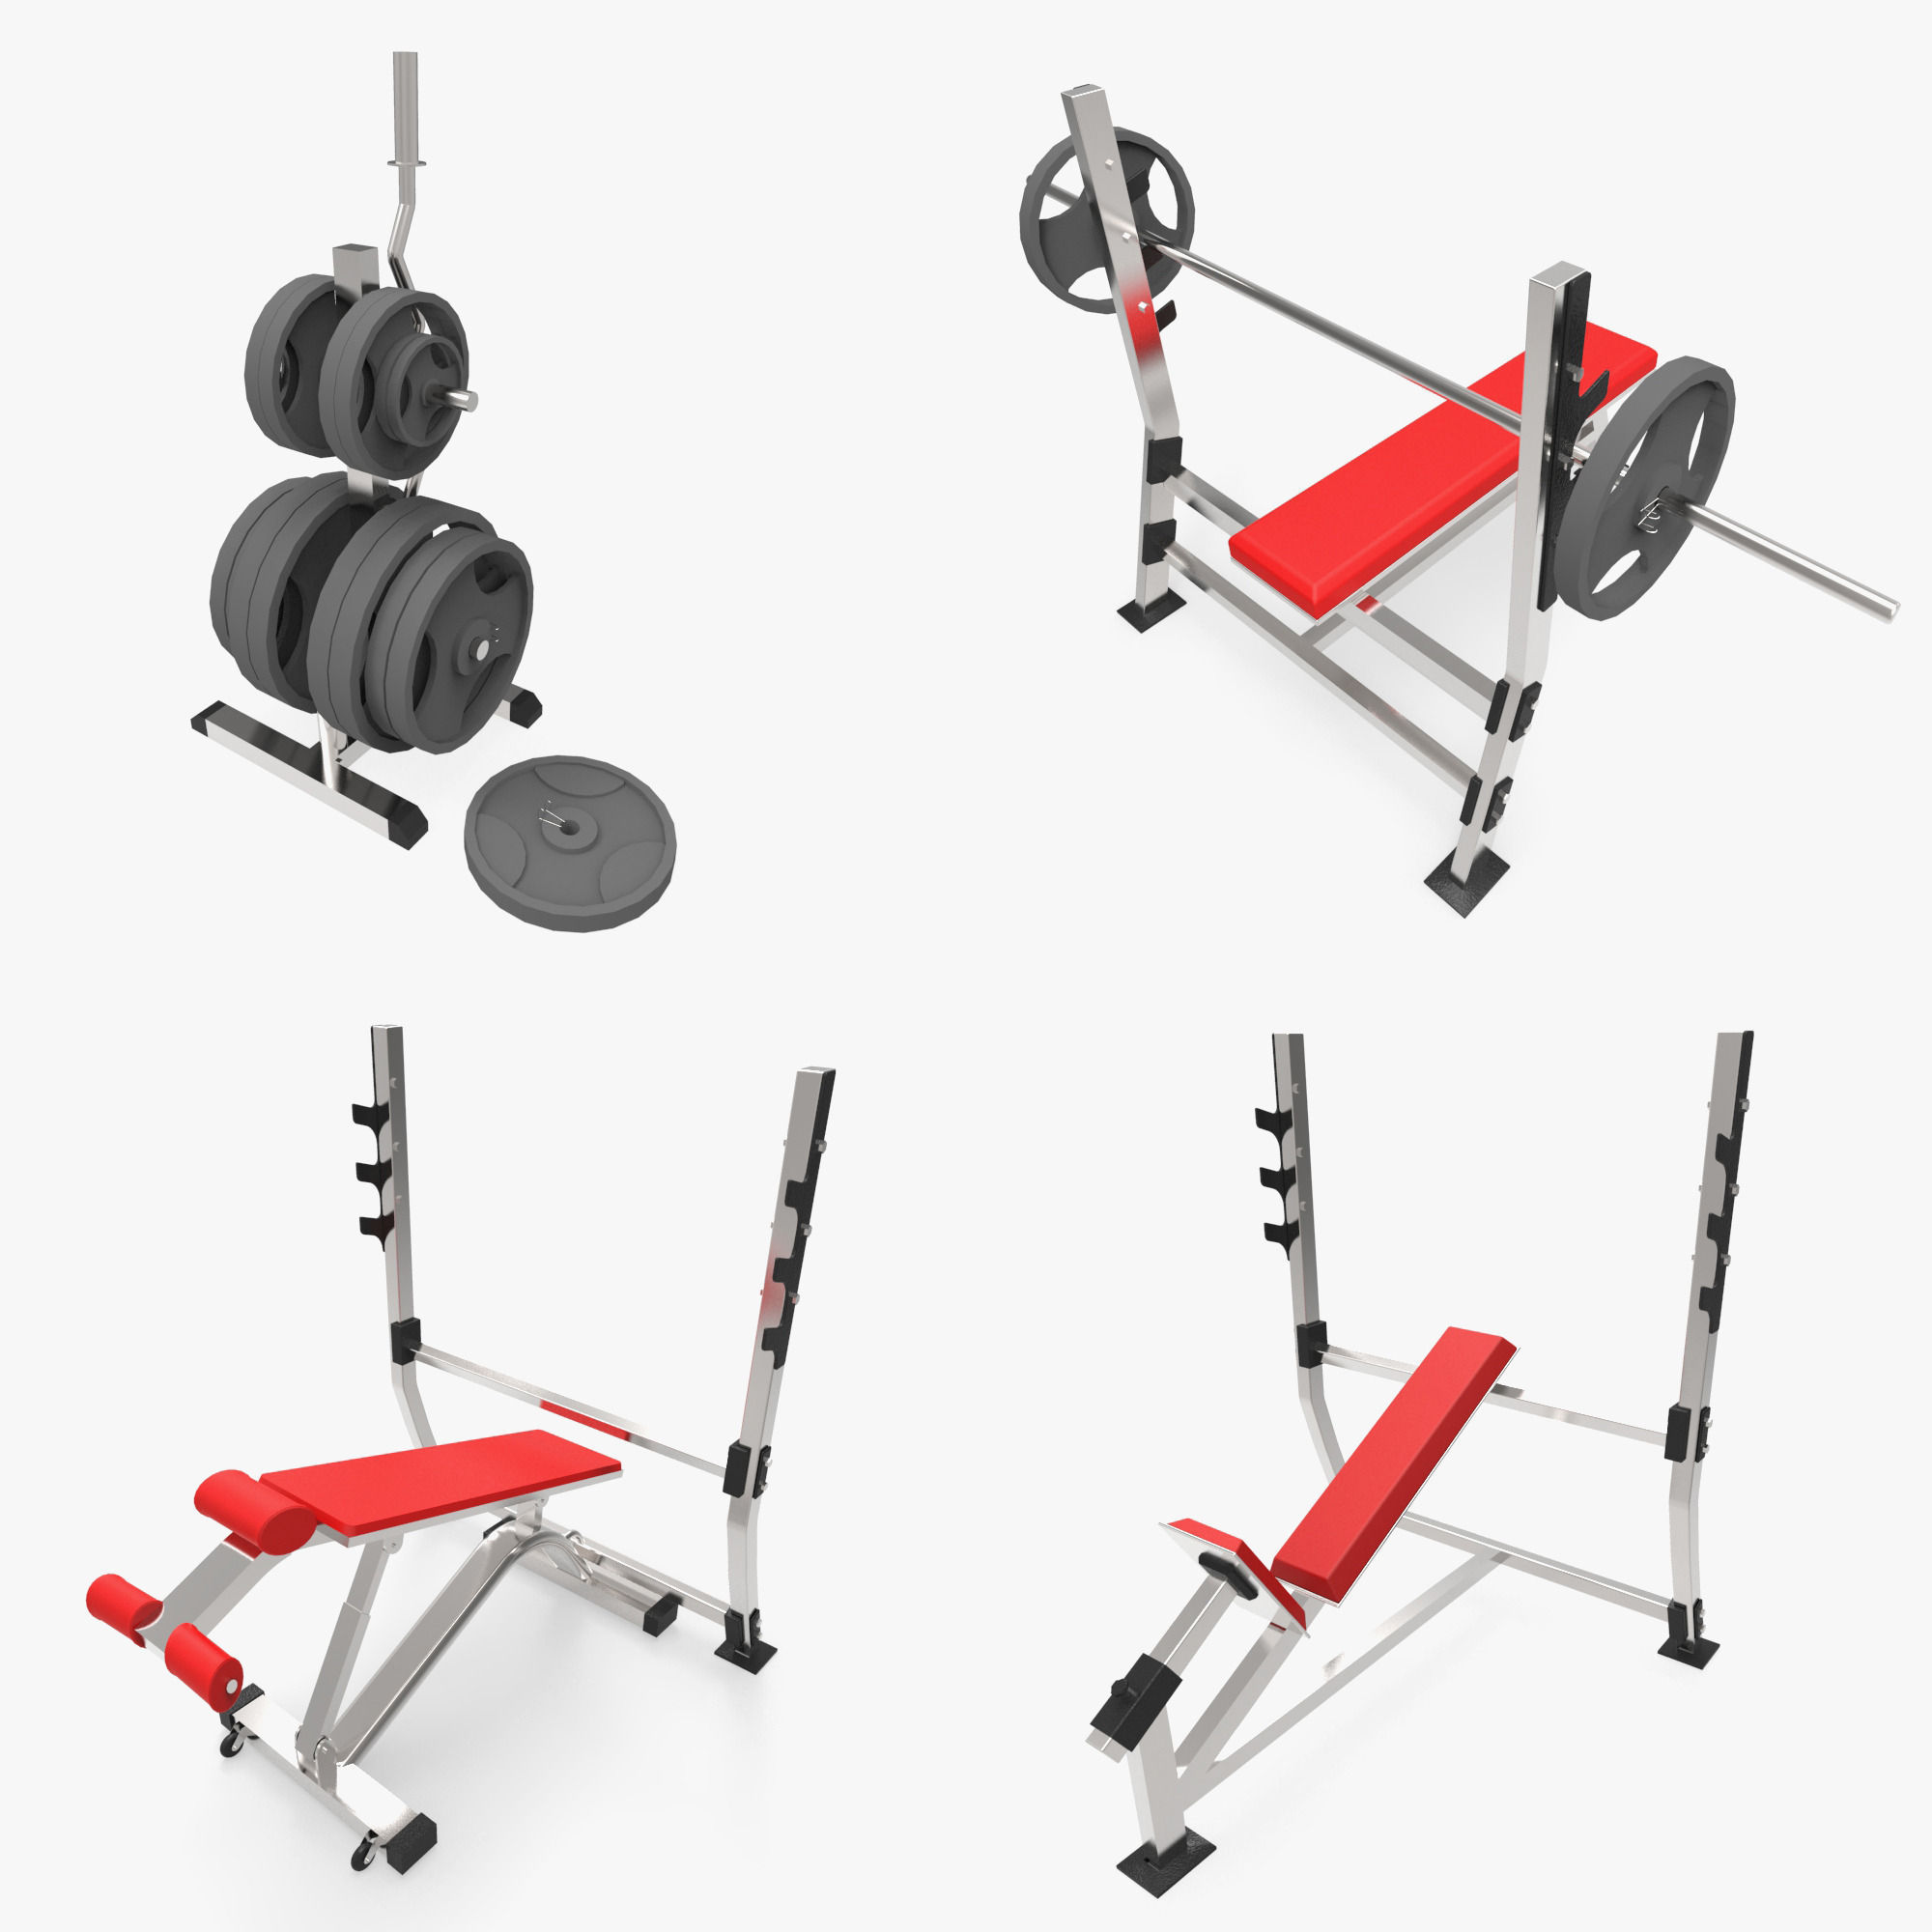 Buy Fitness Equipment from Manufacturer in UAE